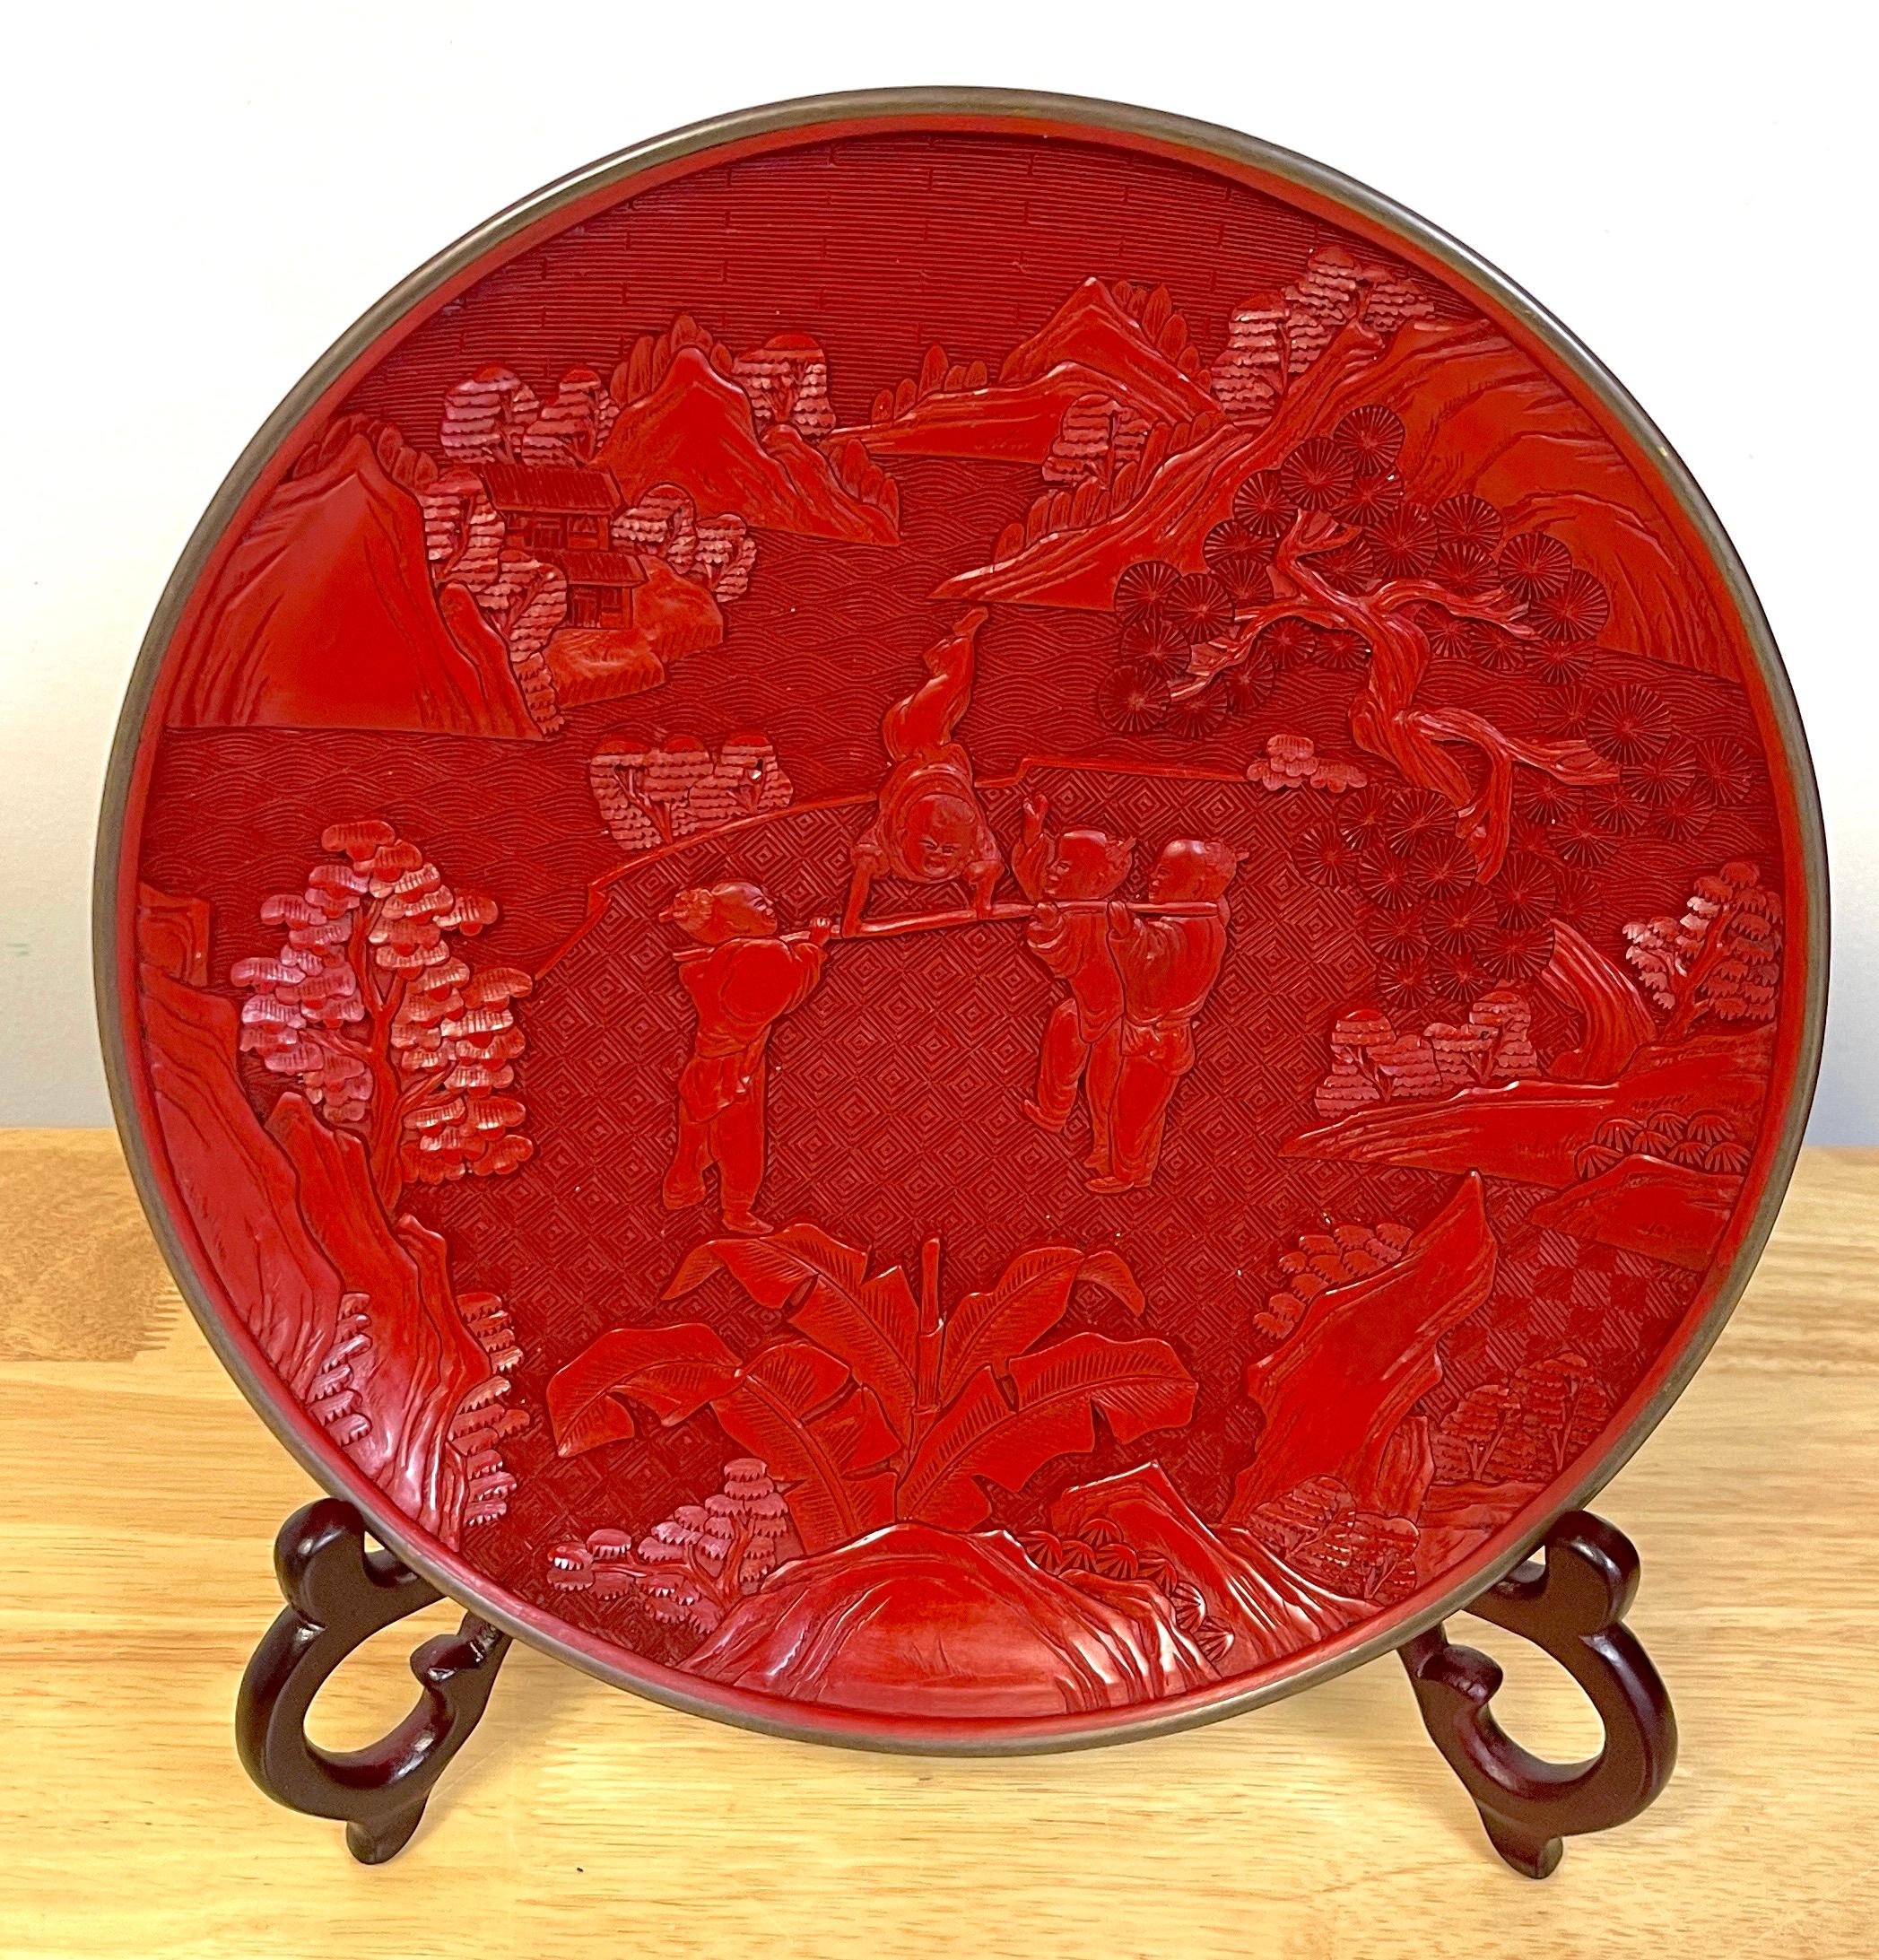 Chinese Export Carved Cinnabar 'Acrobats' Display Plate, & Stand 
China, 20th century 

Depicting four Chinese Acrobats performing in landscape. Unmarked. Includes carved hardwood display stand 


Overall Measurements 
Plate alone 10-Inches